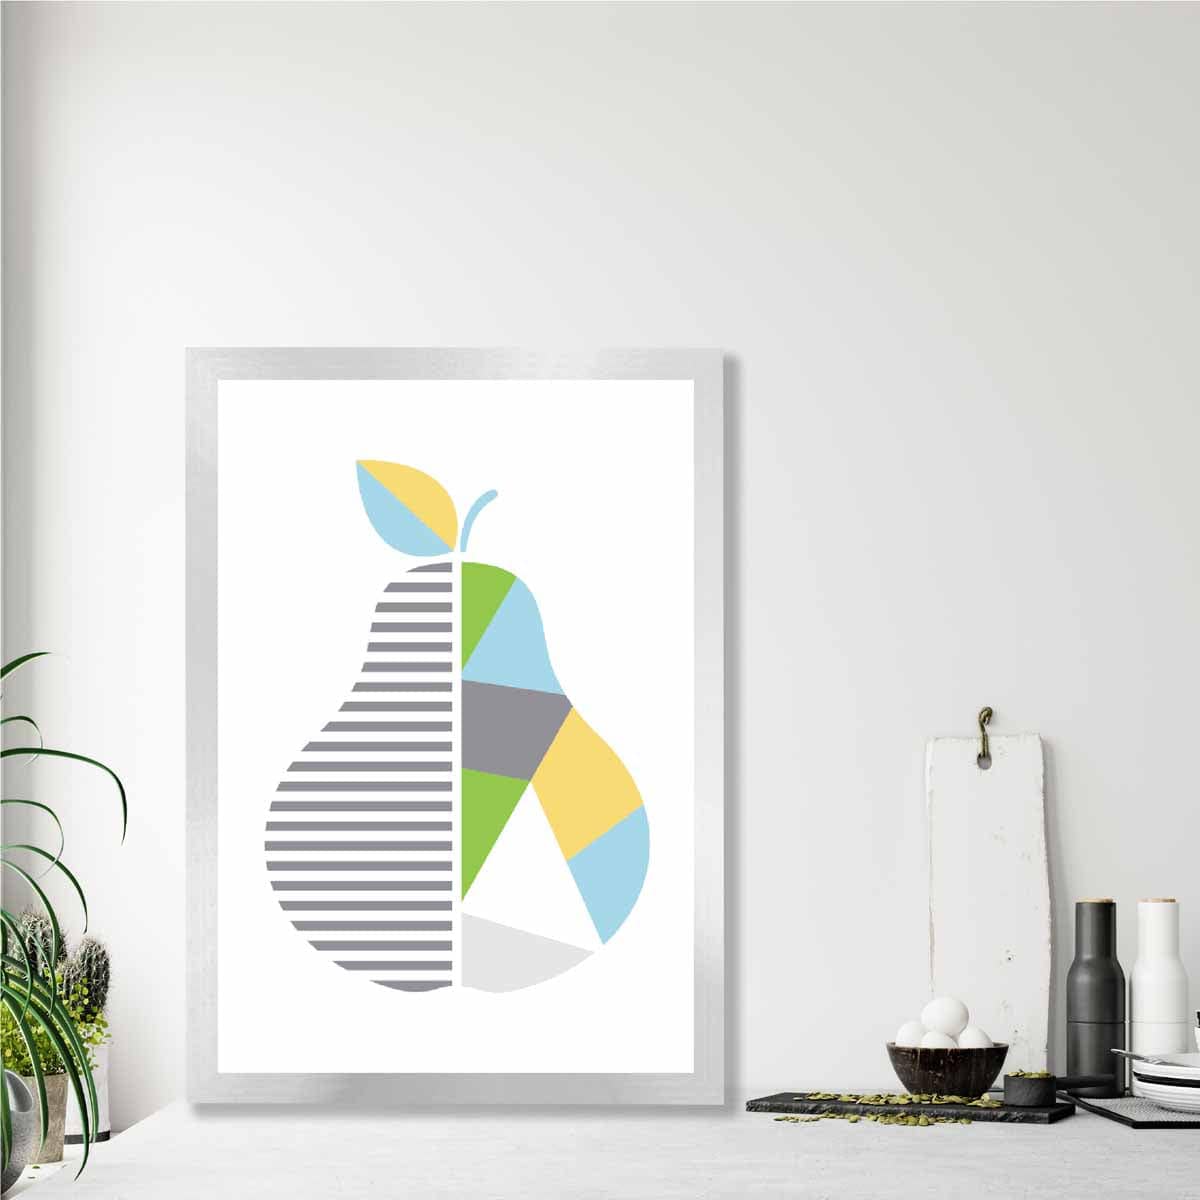 Geometric Fruit Poster of Pear in Yellow Blue Green